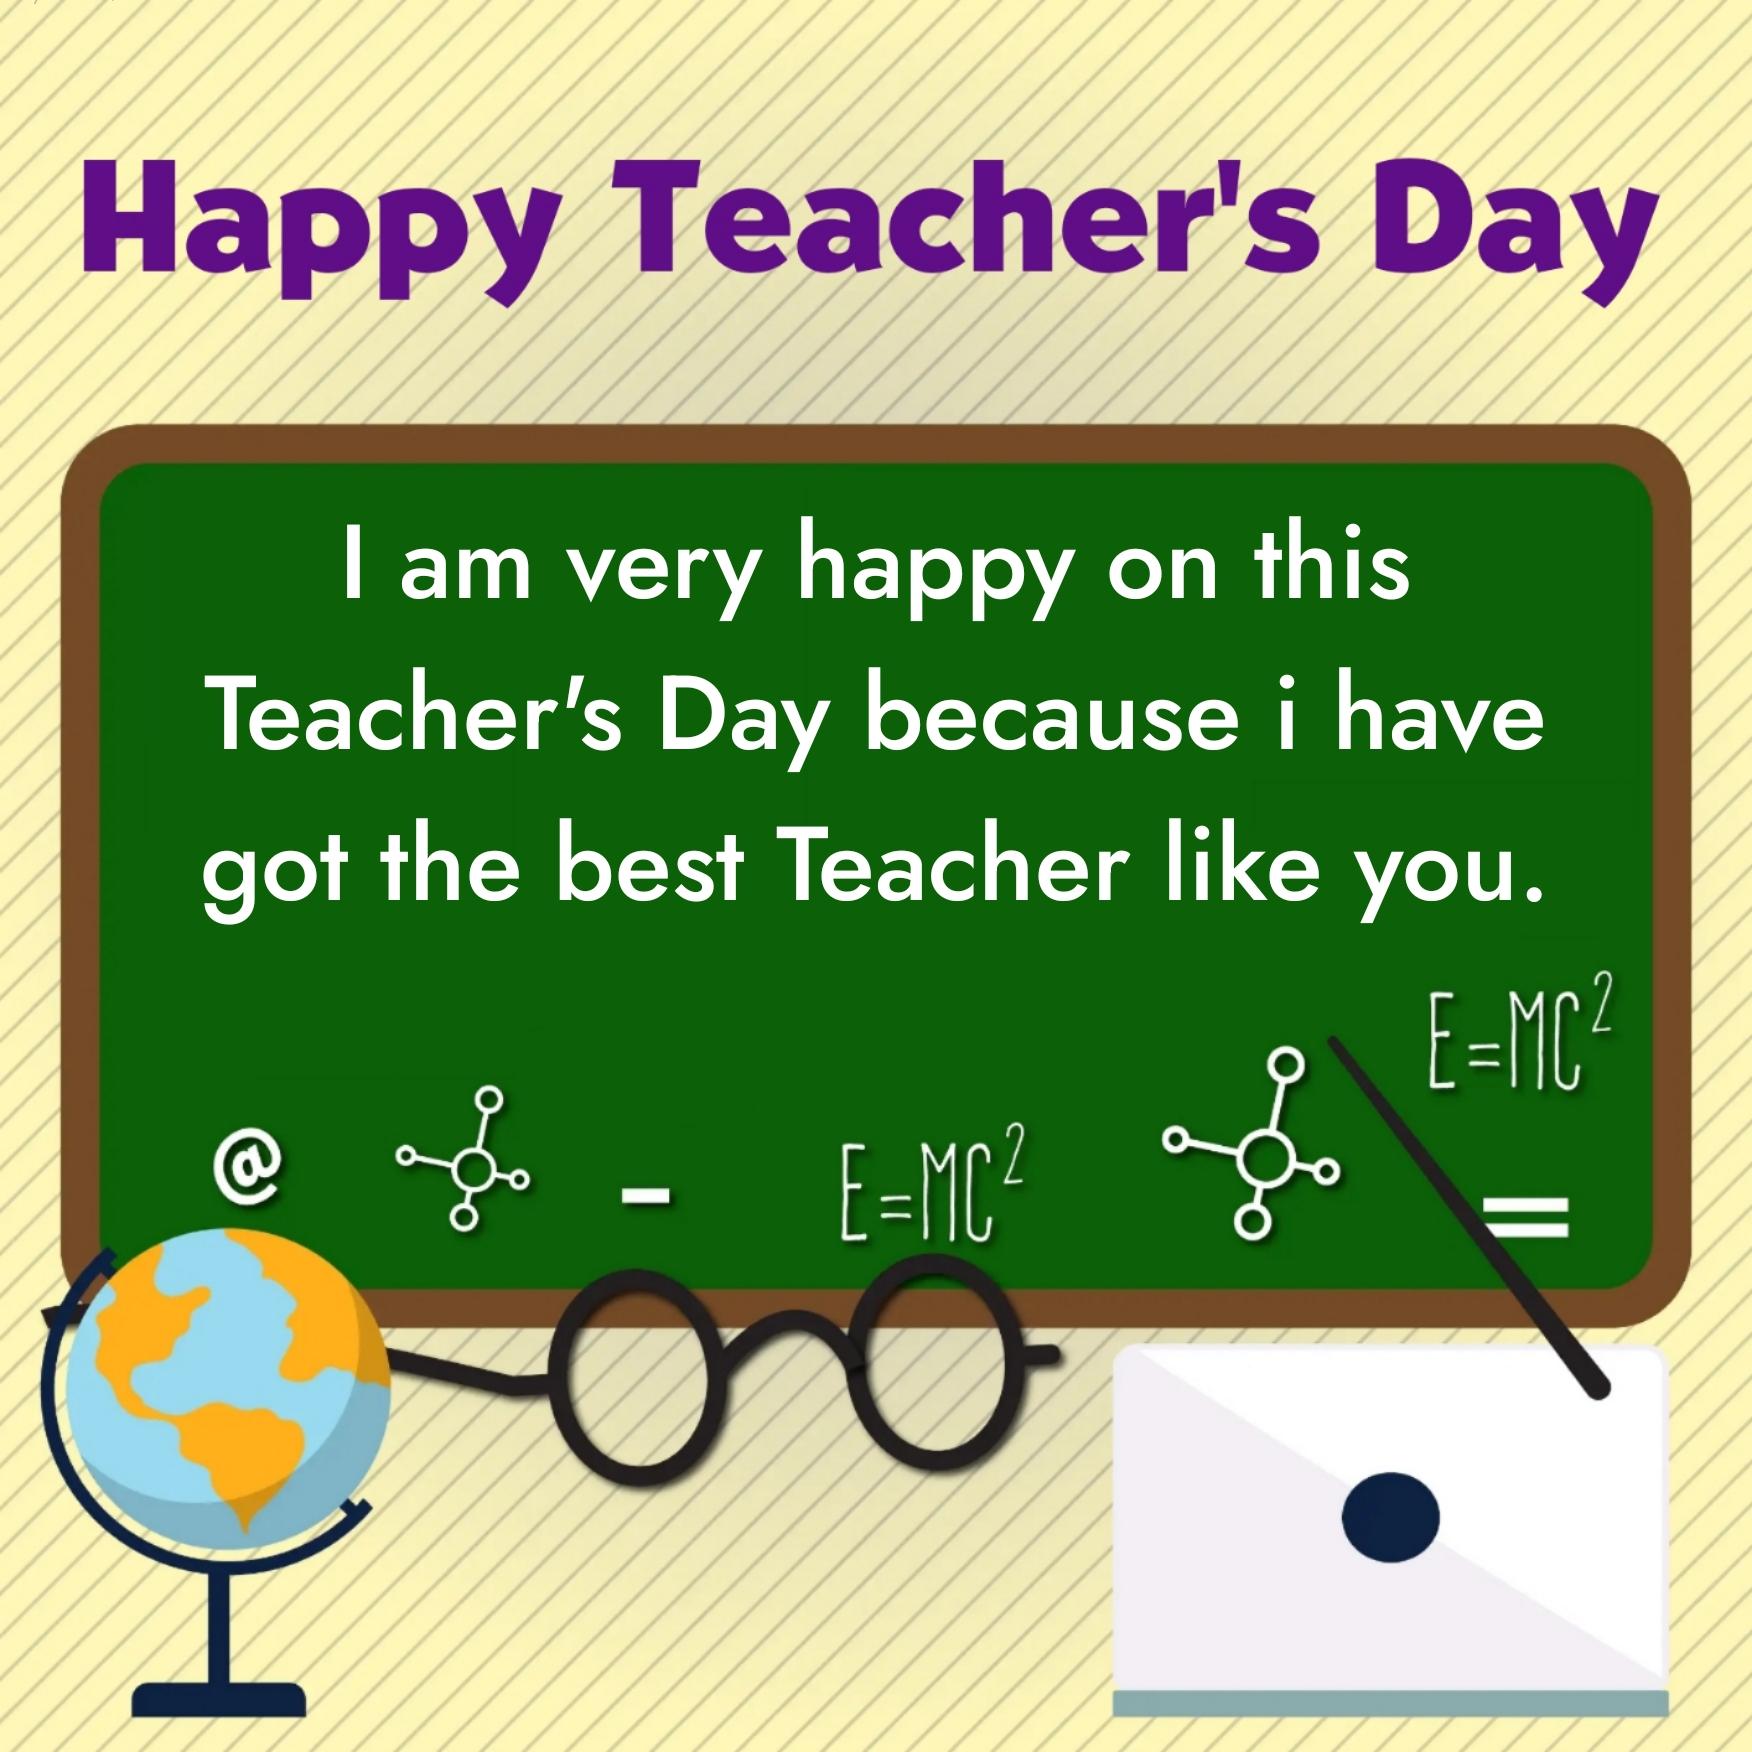 I am very happy on this Teacher's Day because